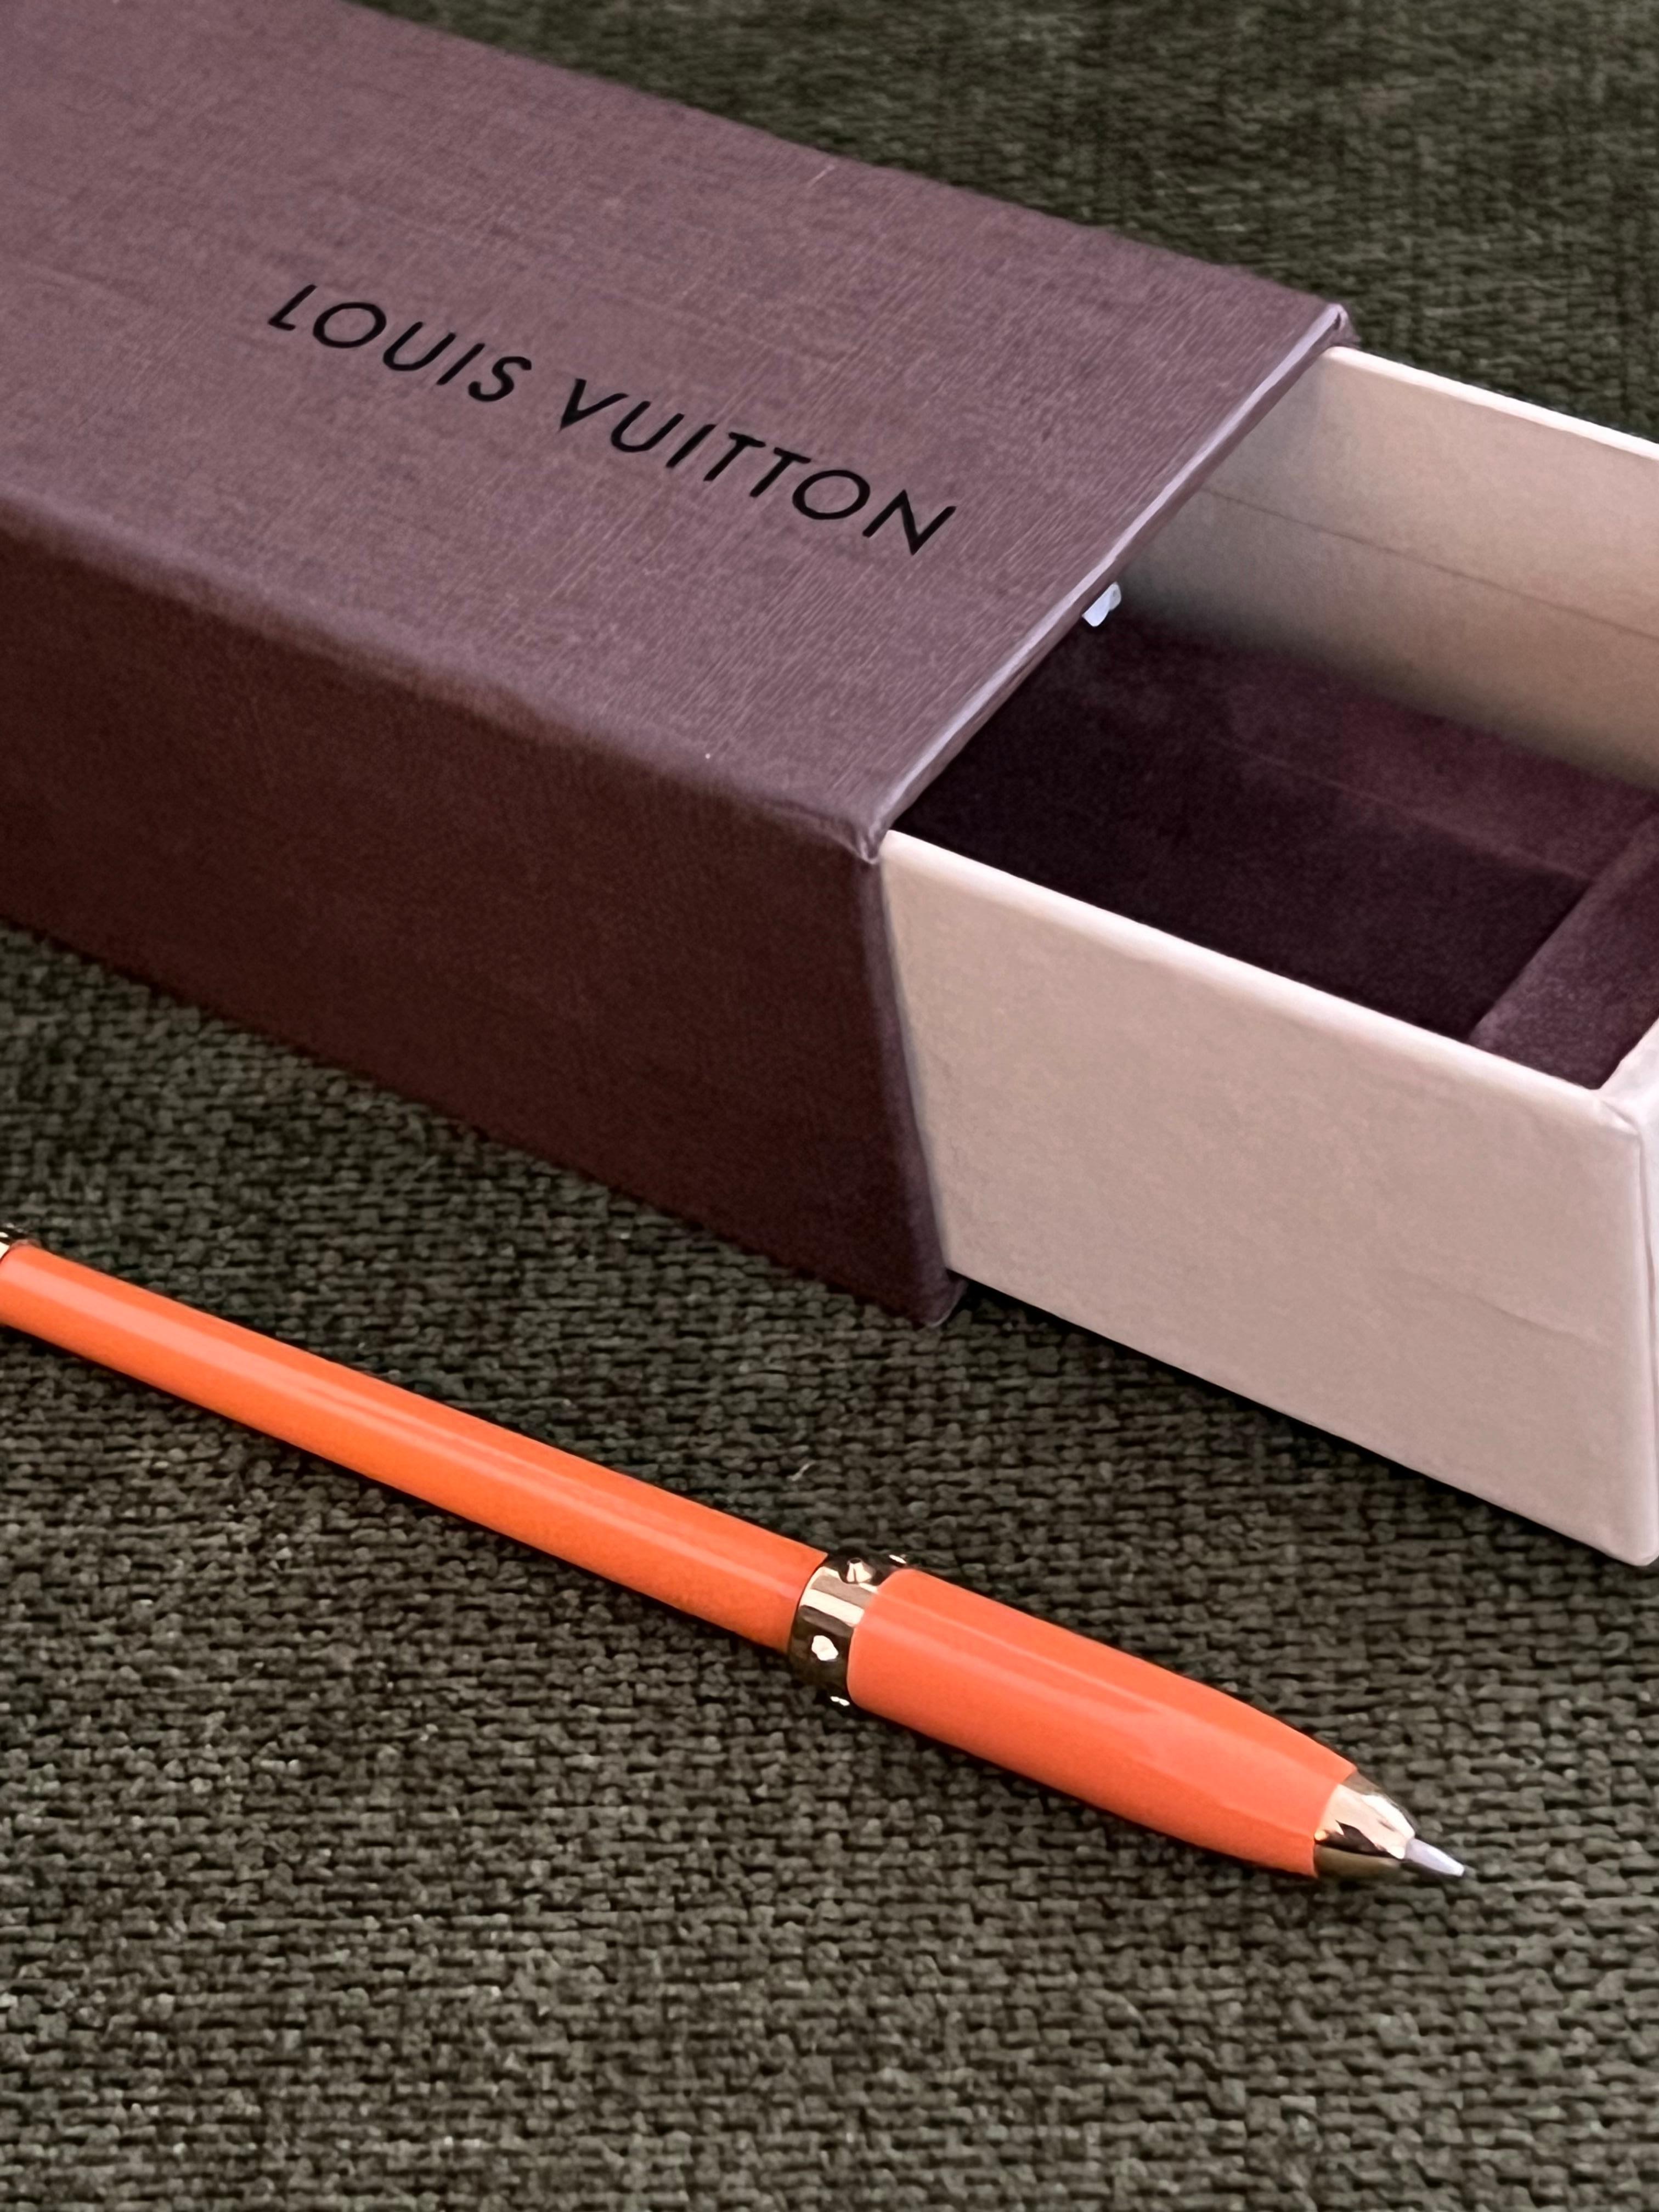 Louis Vuitton pen made to fit in the smaller-than-usual pen holders in the agendas. 
It is Orange& Gold which has a faux lid, the pen actually comes out through the tip of the pen when you twist the bottom of it.
It comes with the original box and